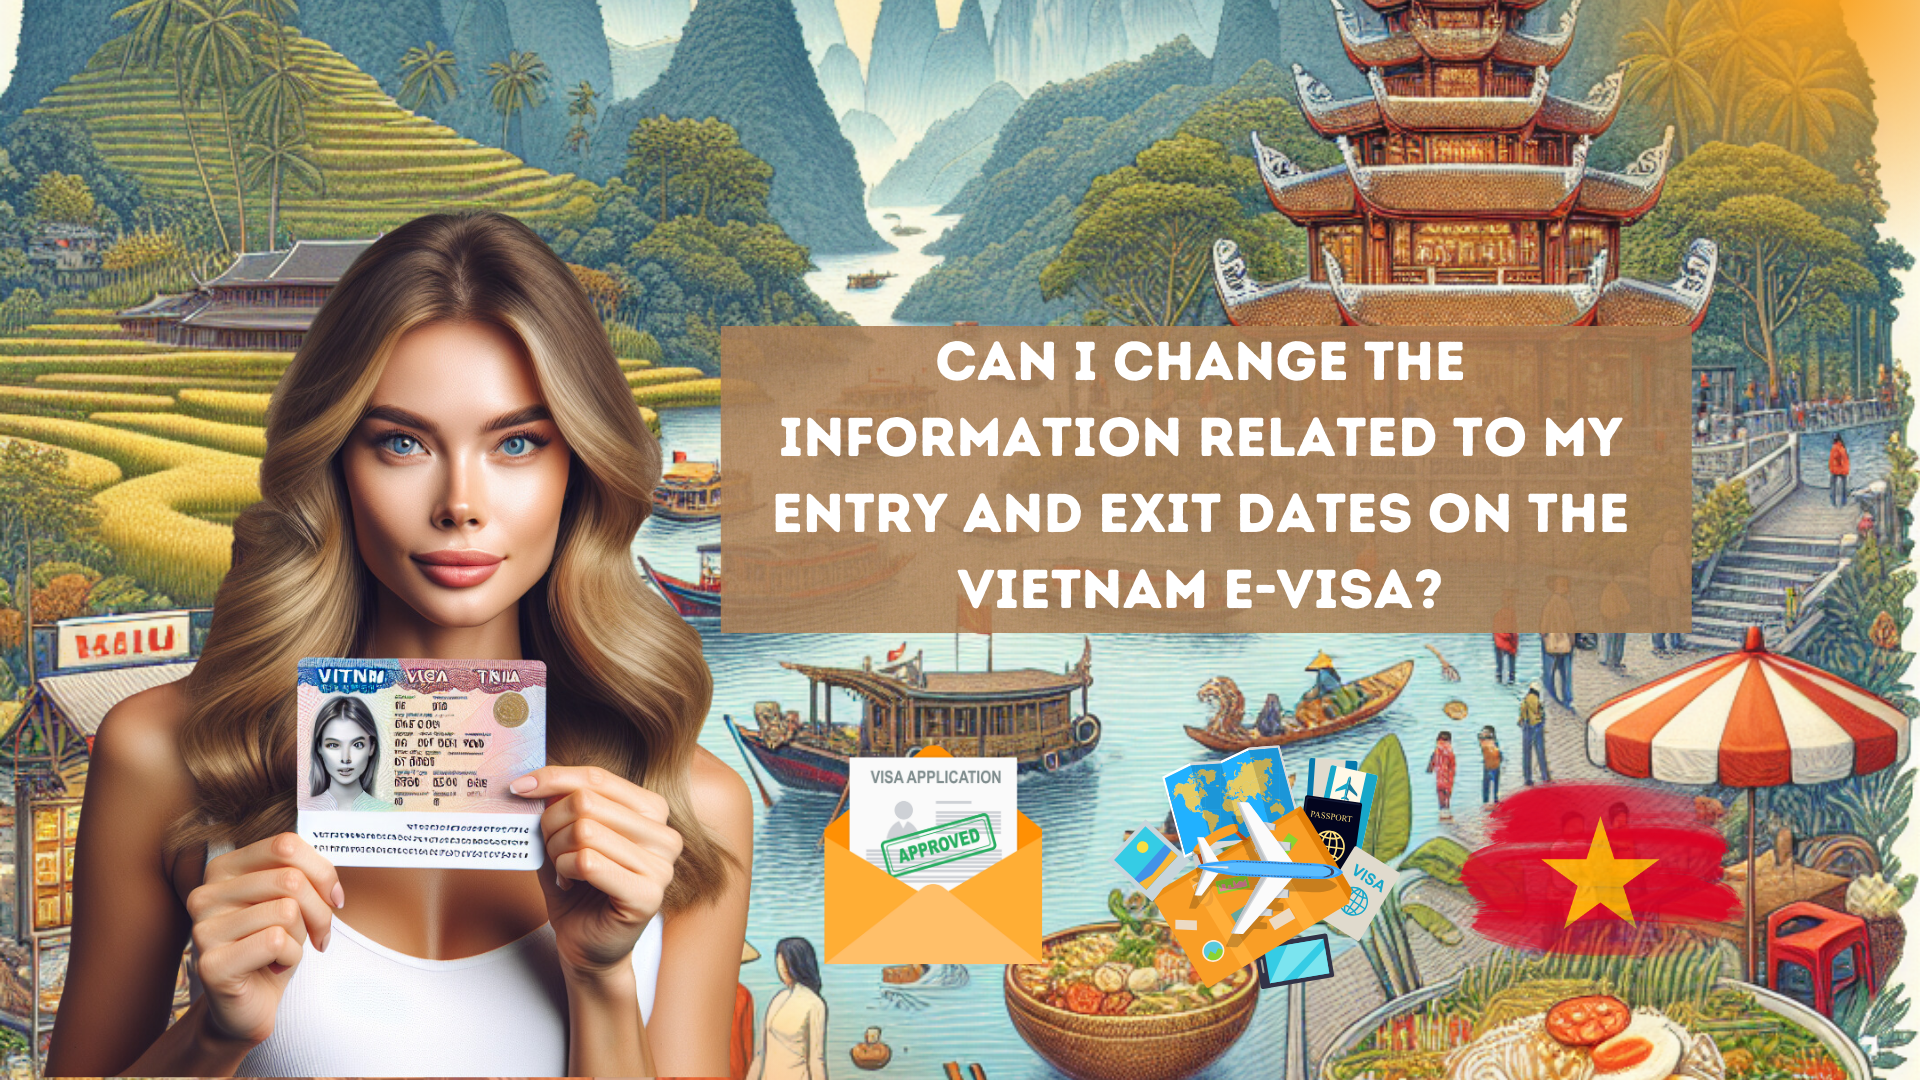 Can I change the information related to my entry and exit dates on the Vietnam E-visa?